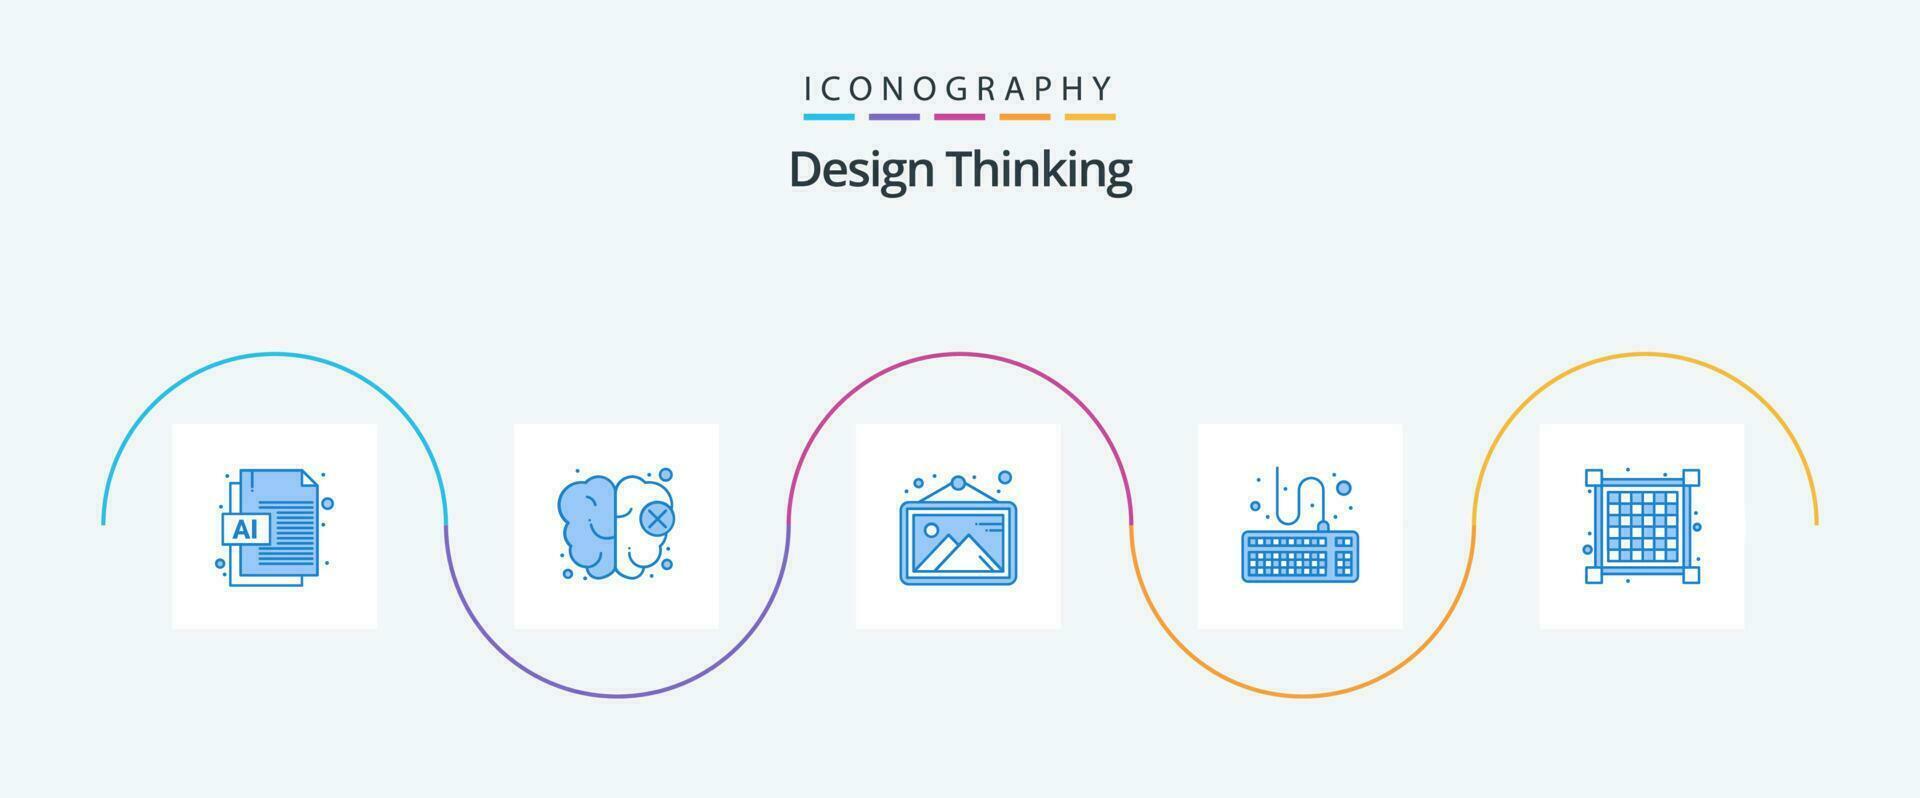 Design Thinking Blue 5 Icon Pack Including . layout. photo. grid. type vector